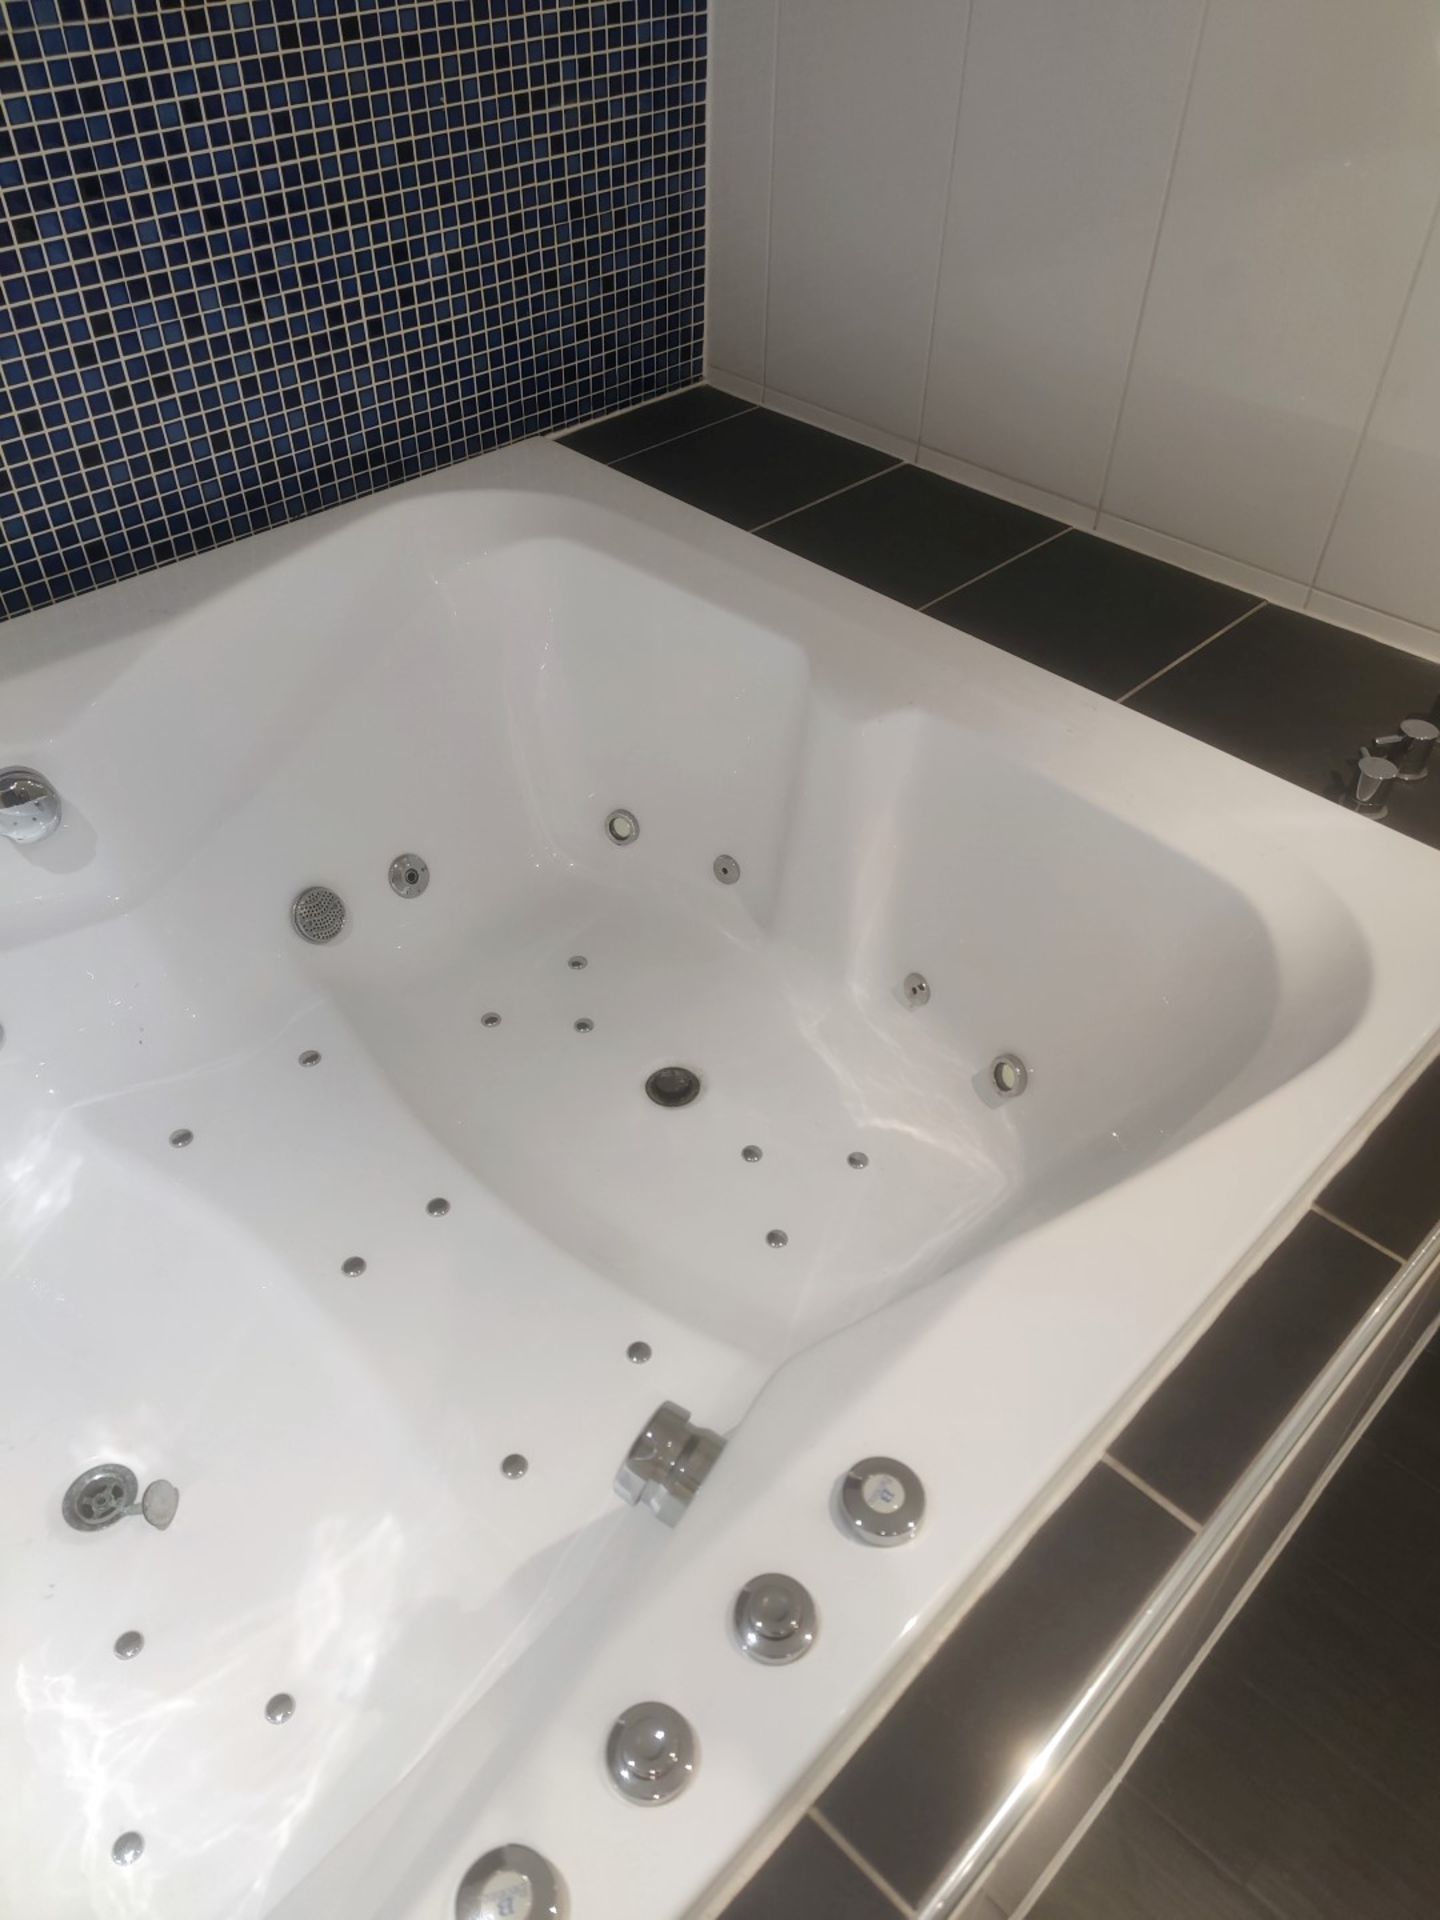 1 x Bronte Jacuzzi Whirlpool Bath - Approx 6.5ft x 5ft Size - Includes Brassware, Water Jets & Pump - Image 8 of 15